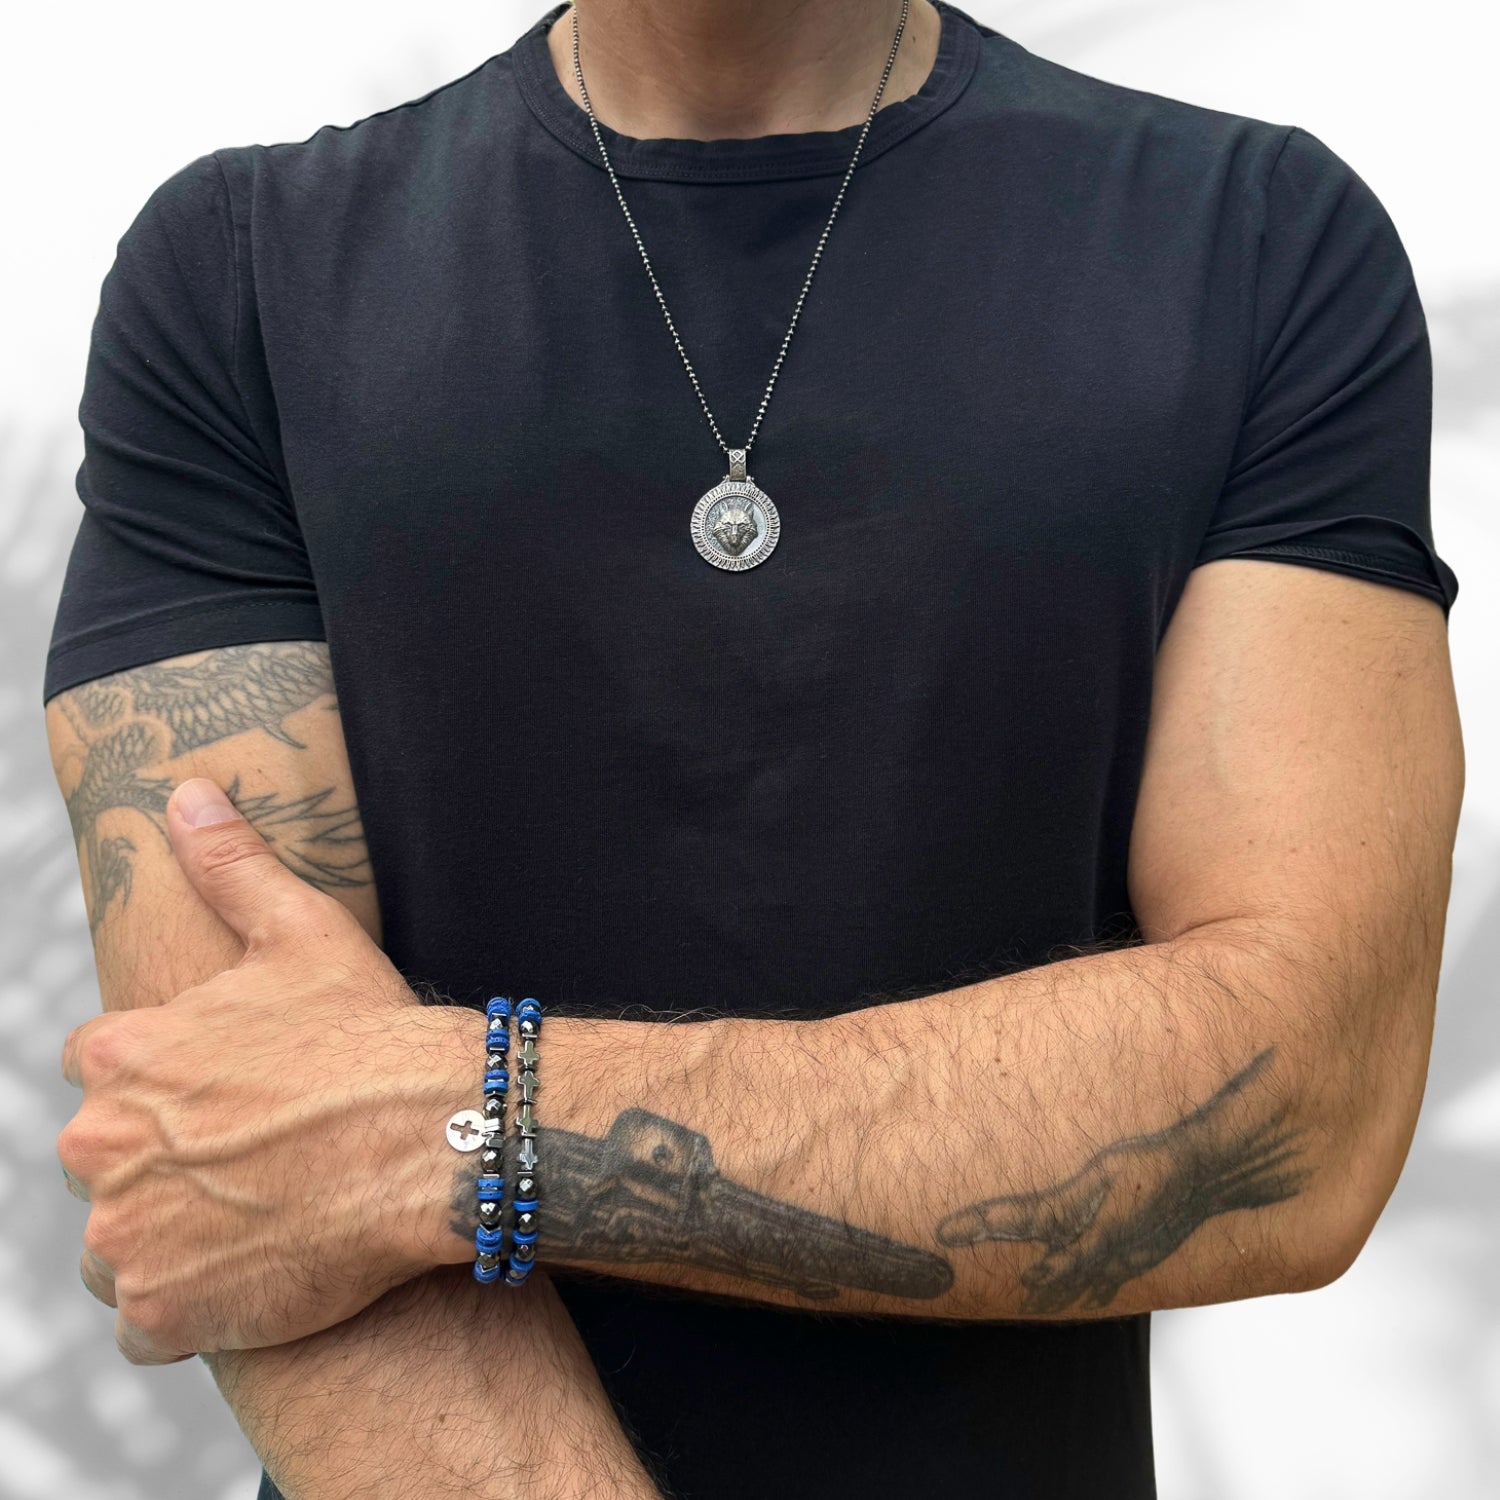 Handmade Spiritual Bracelet Set for men, featuring hematite and blue lava rock beads with a 925 sterling silver cross charm